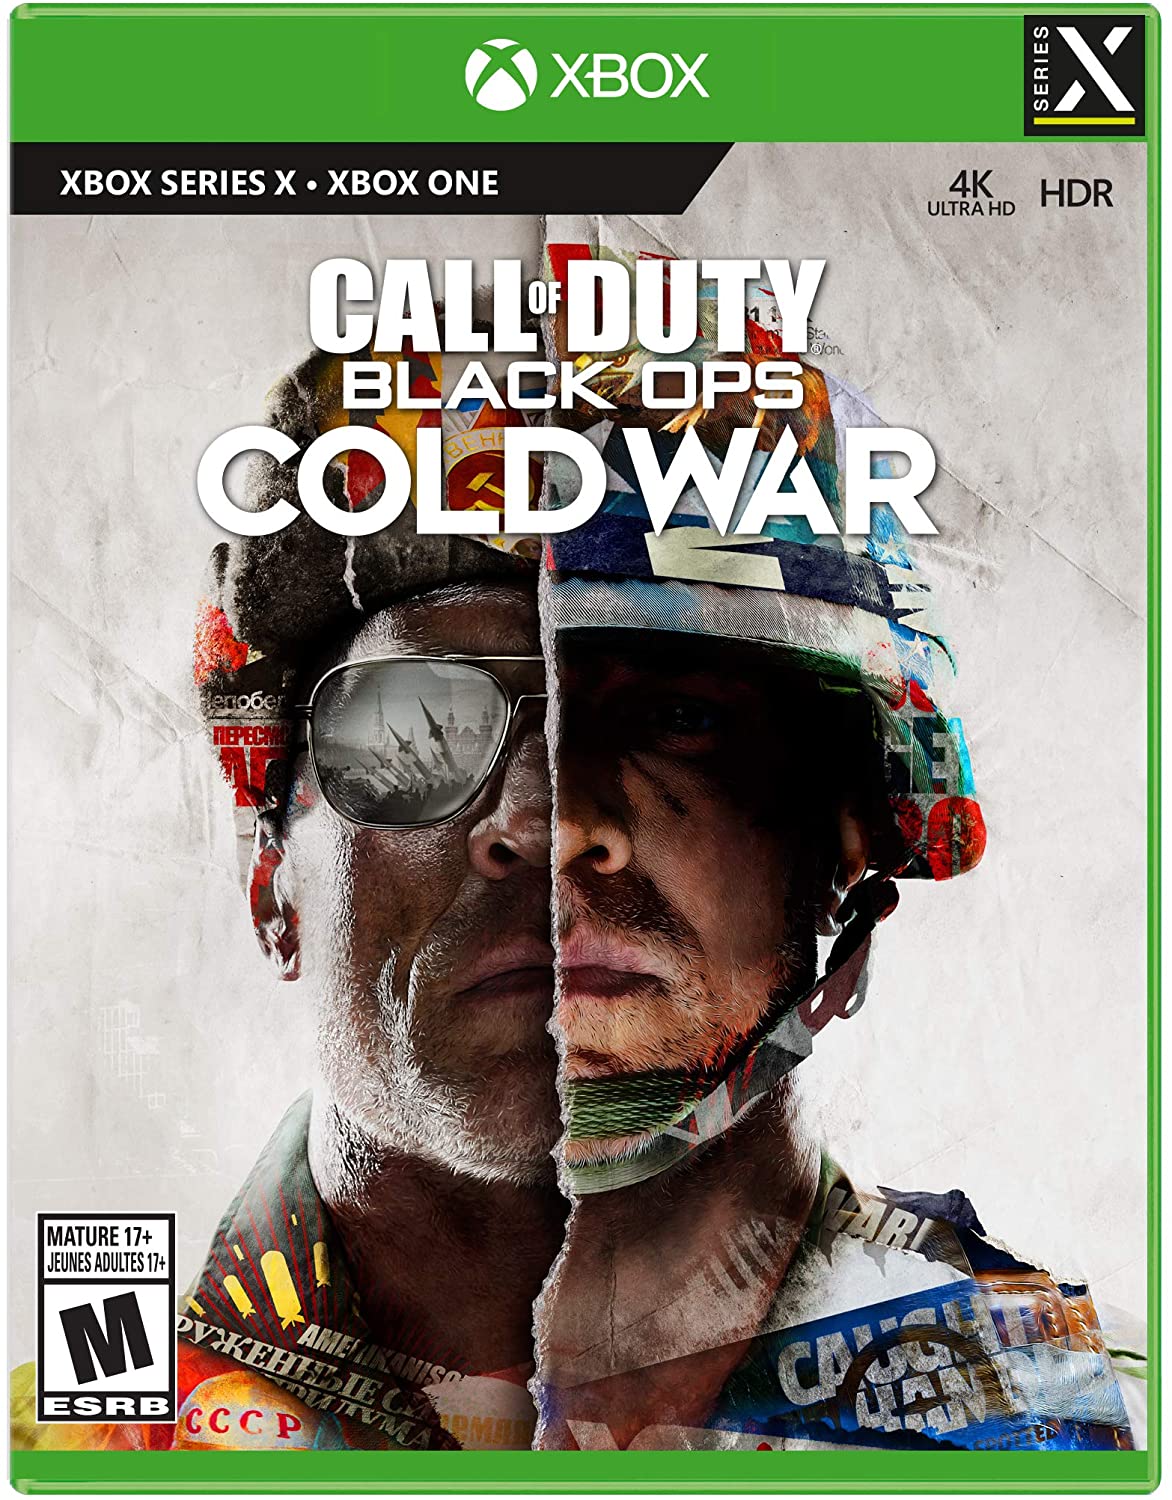 Call of Duty Black Ops Cold War Xbox Series X XBSX